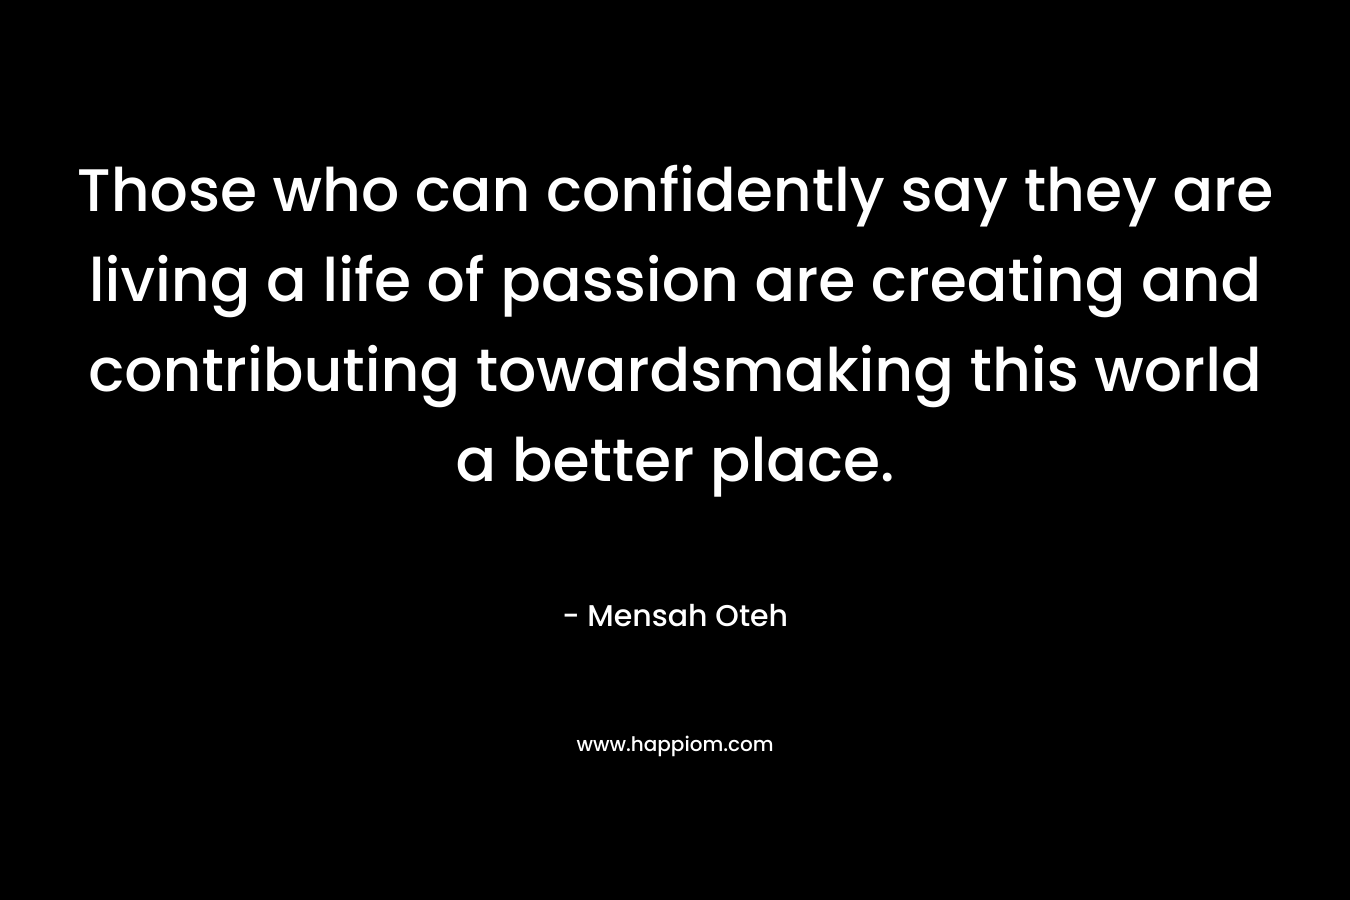 Those who can confidently say they are living a life of passion are creating and contributing towardsmaking this world a better place. – Mensah Oteh